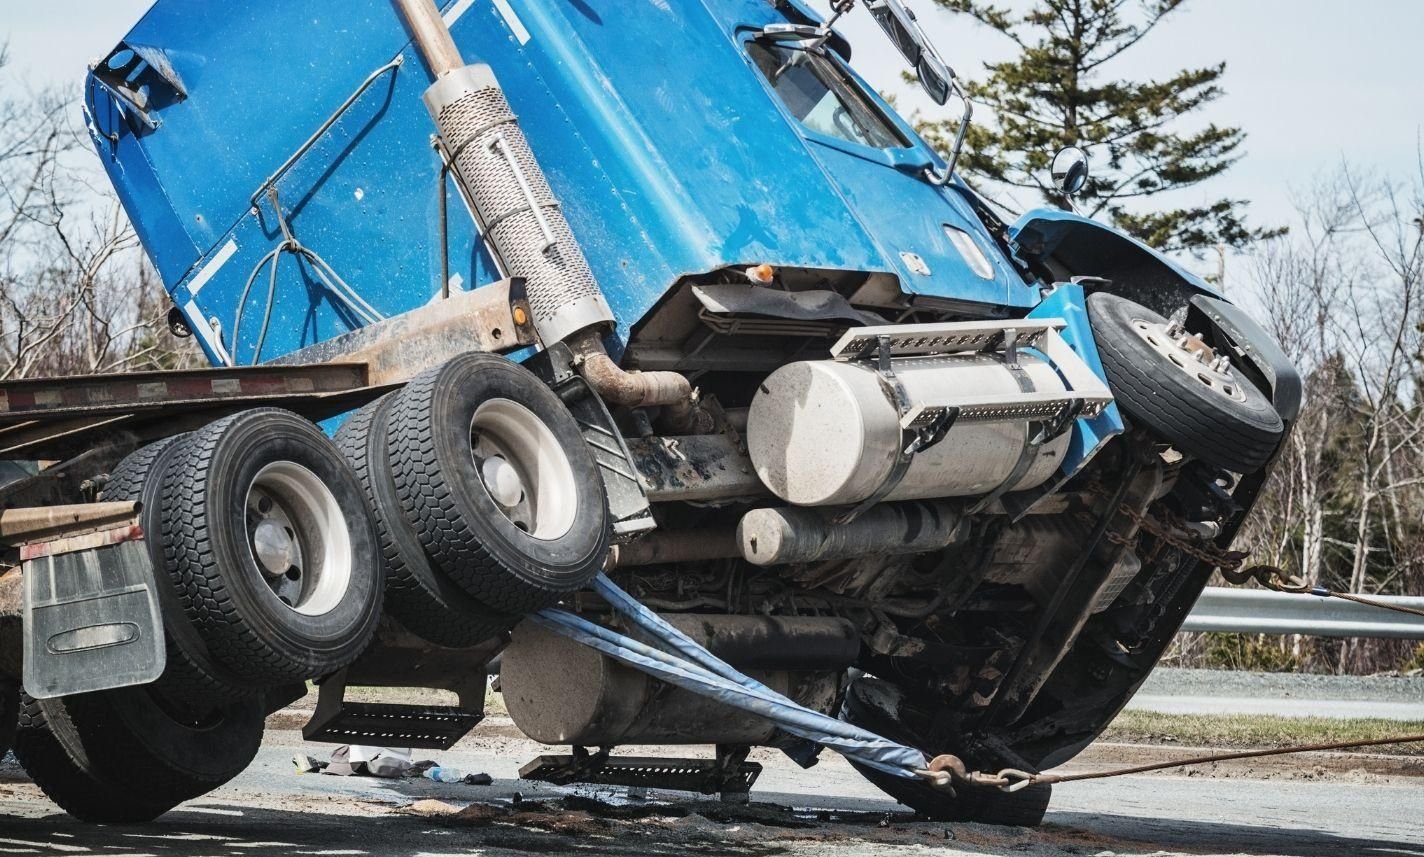 braselton-commercial-truck-accident-injury-lawyer